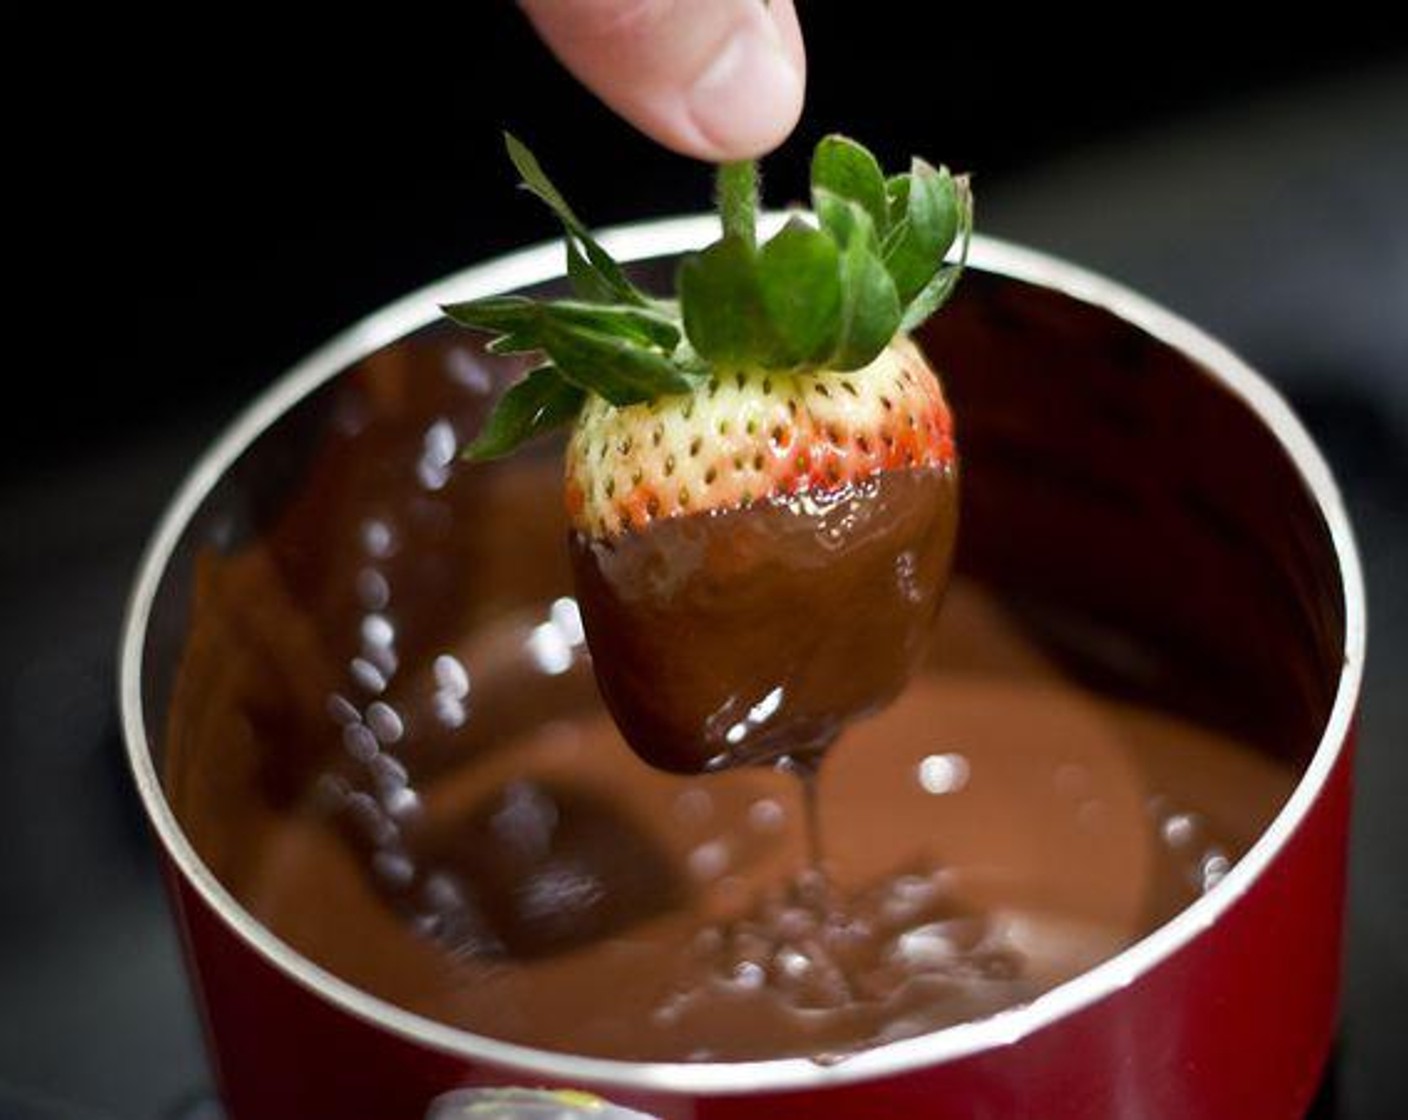 step 2 Remove from heat once completely melted. Dip Fresh Strawberries (10) into chocolate, allowing excess to drip off before placing on a sheet of wax paper.